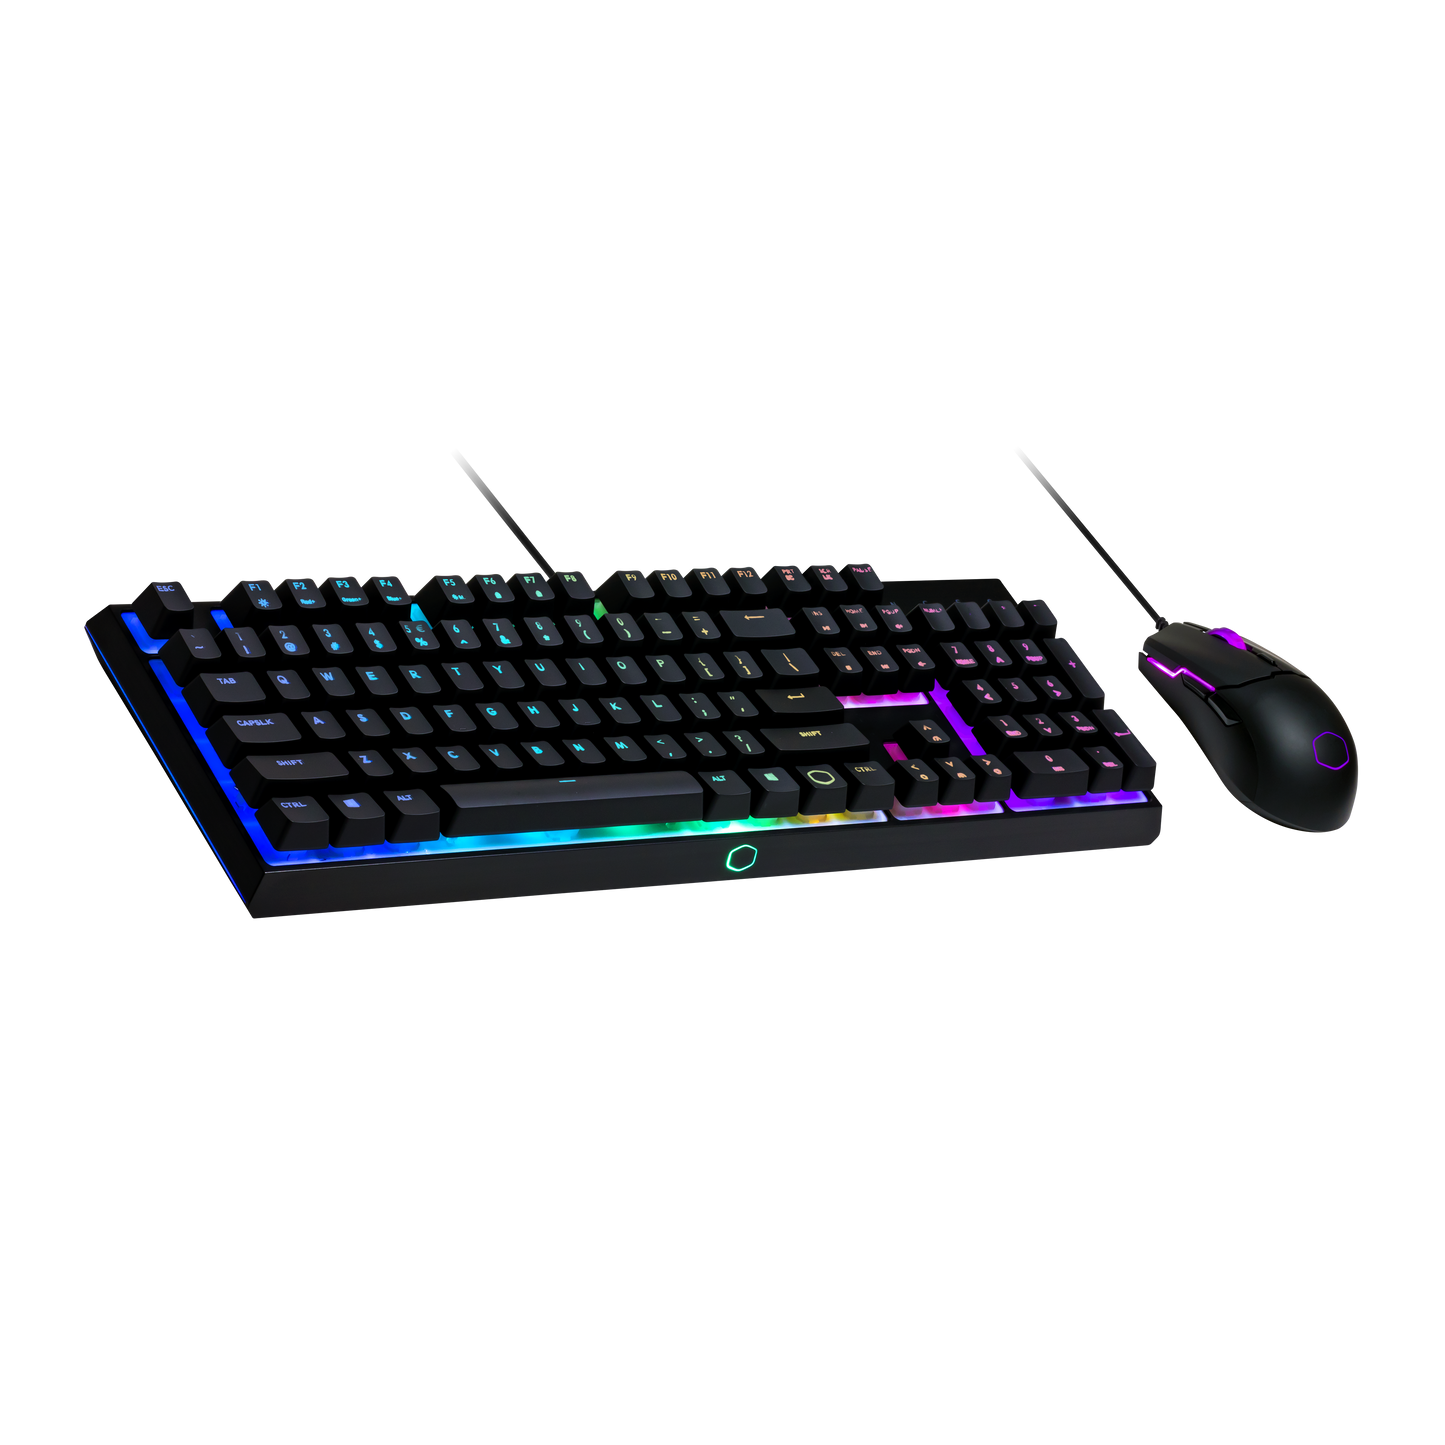 Cooler Master MS110 - RGB Gaming Keyboard & Mouse Combo - US QWERTY